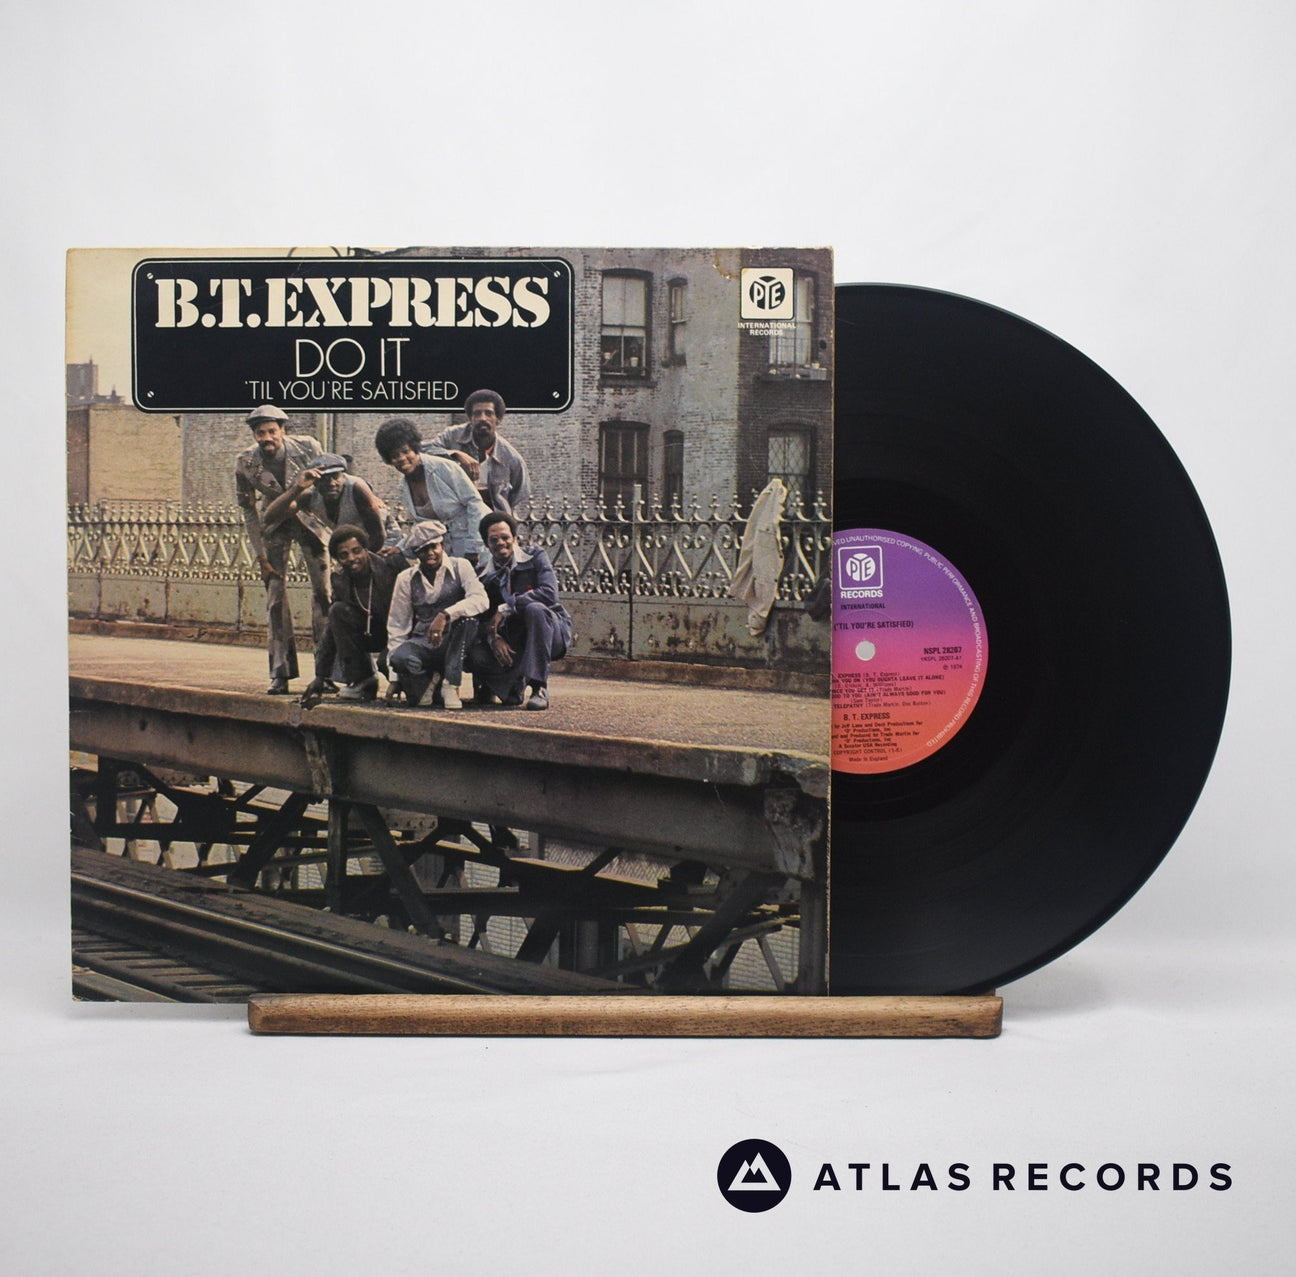 B.T. Express Do It LP Vinyl Record - Front Cover & Record